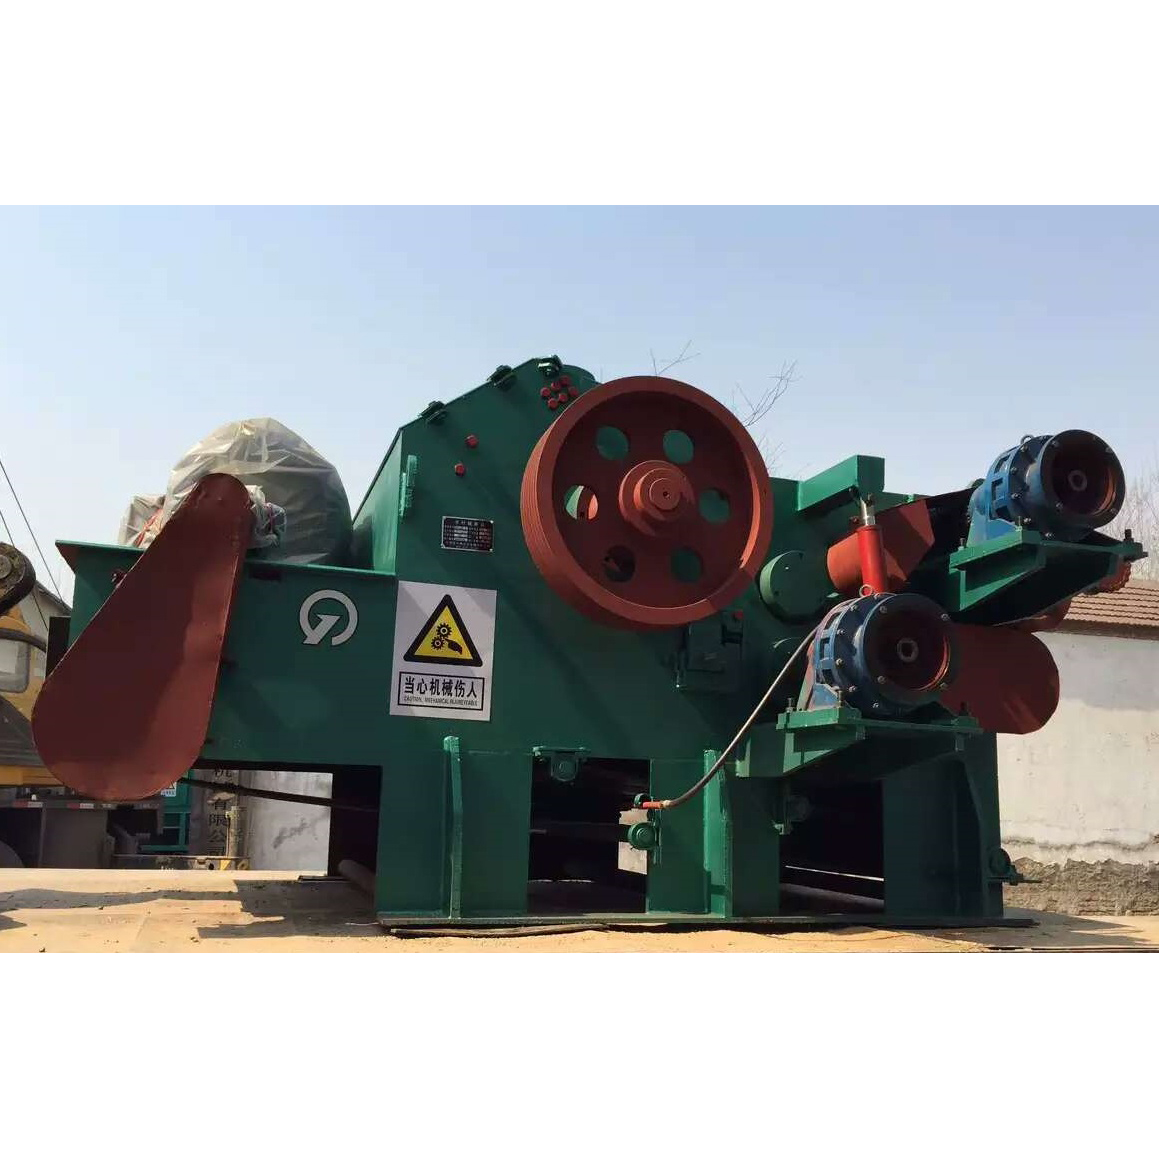 Quots for China 2021 New Design Wood Crusher with Good Price Featured Image